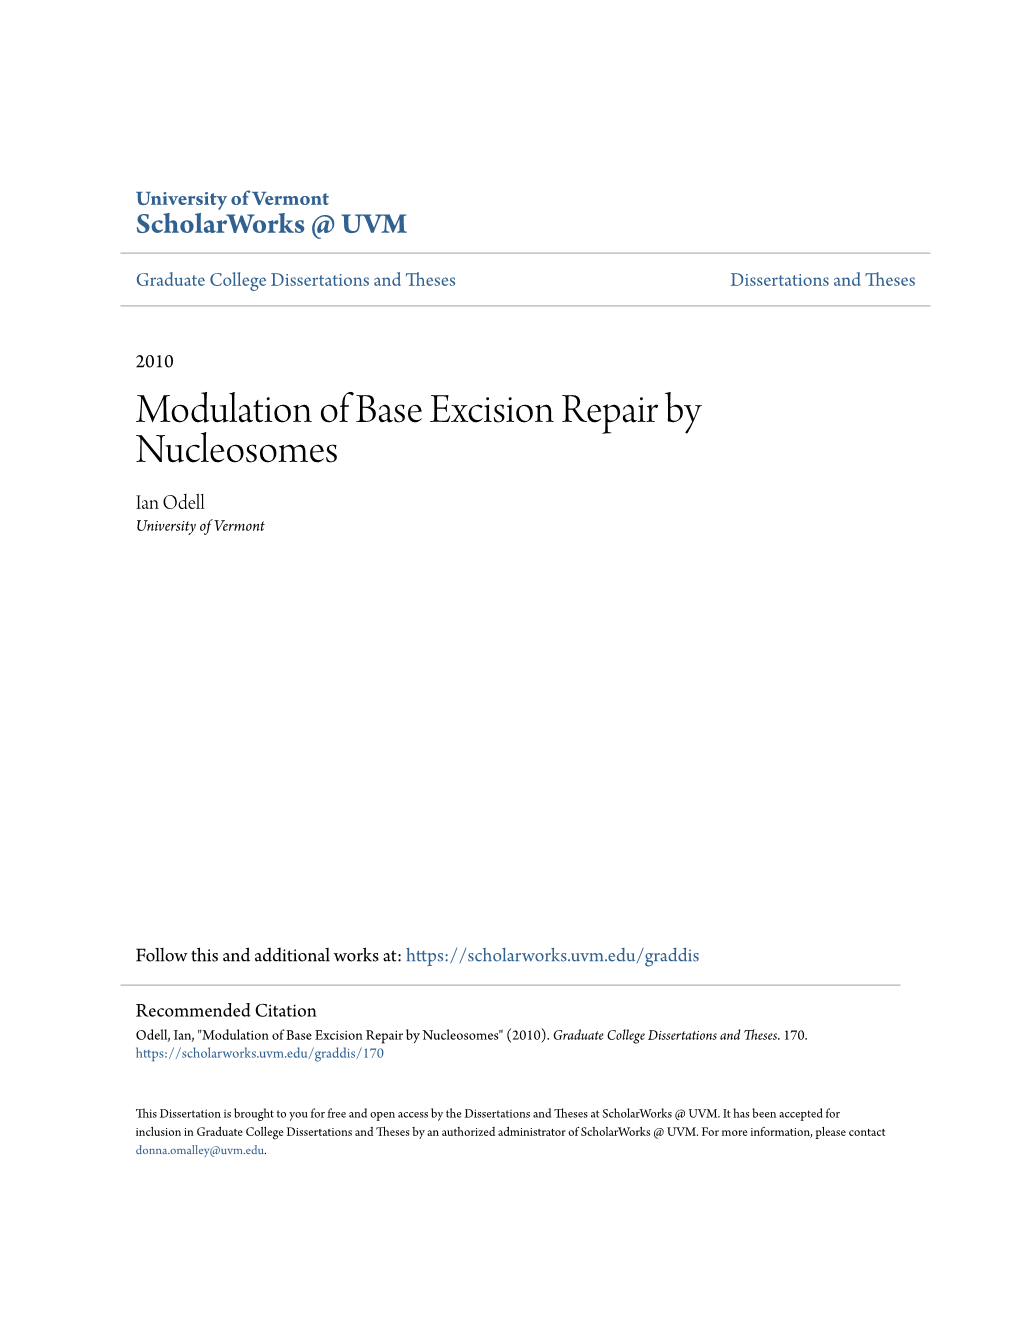 Modulation of Base Excision Repair by Nucleosomes Ian Odell University of Vermont